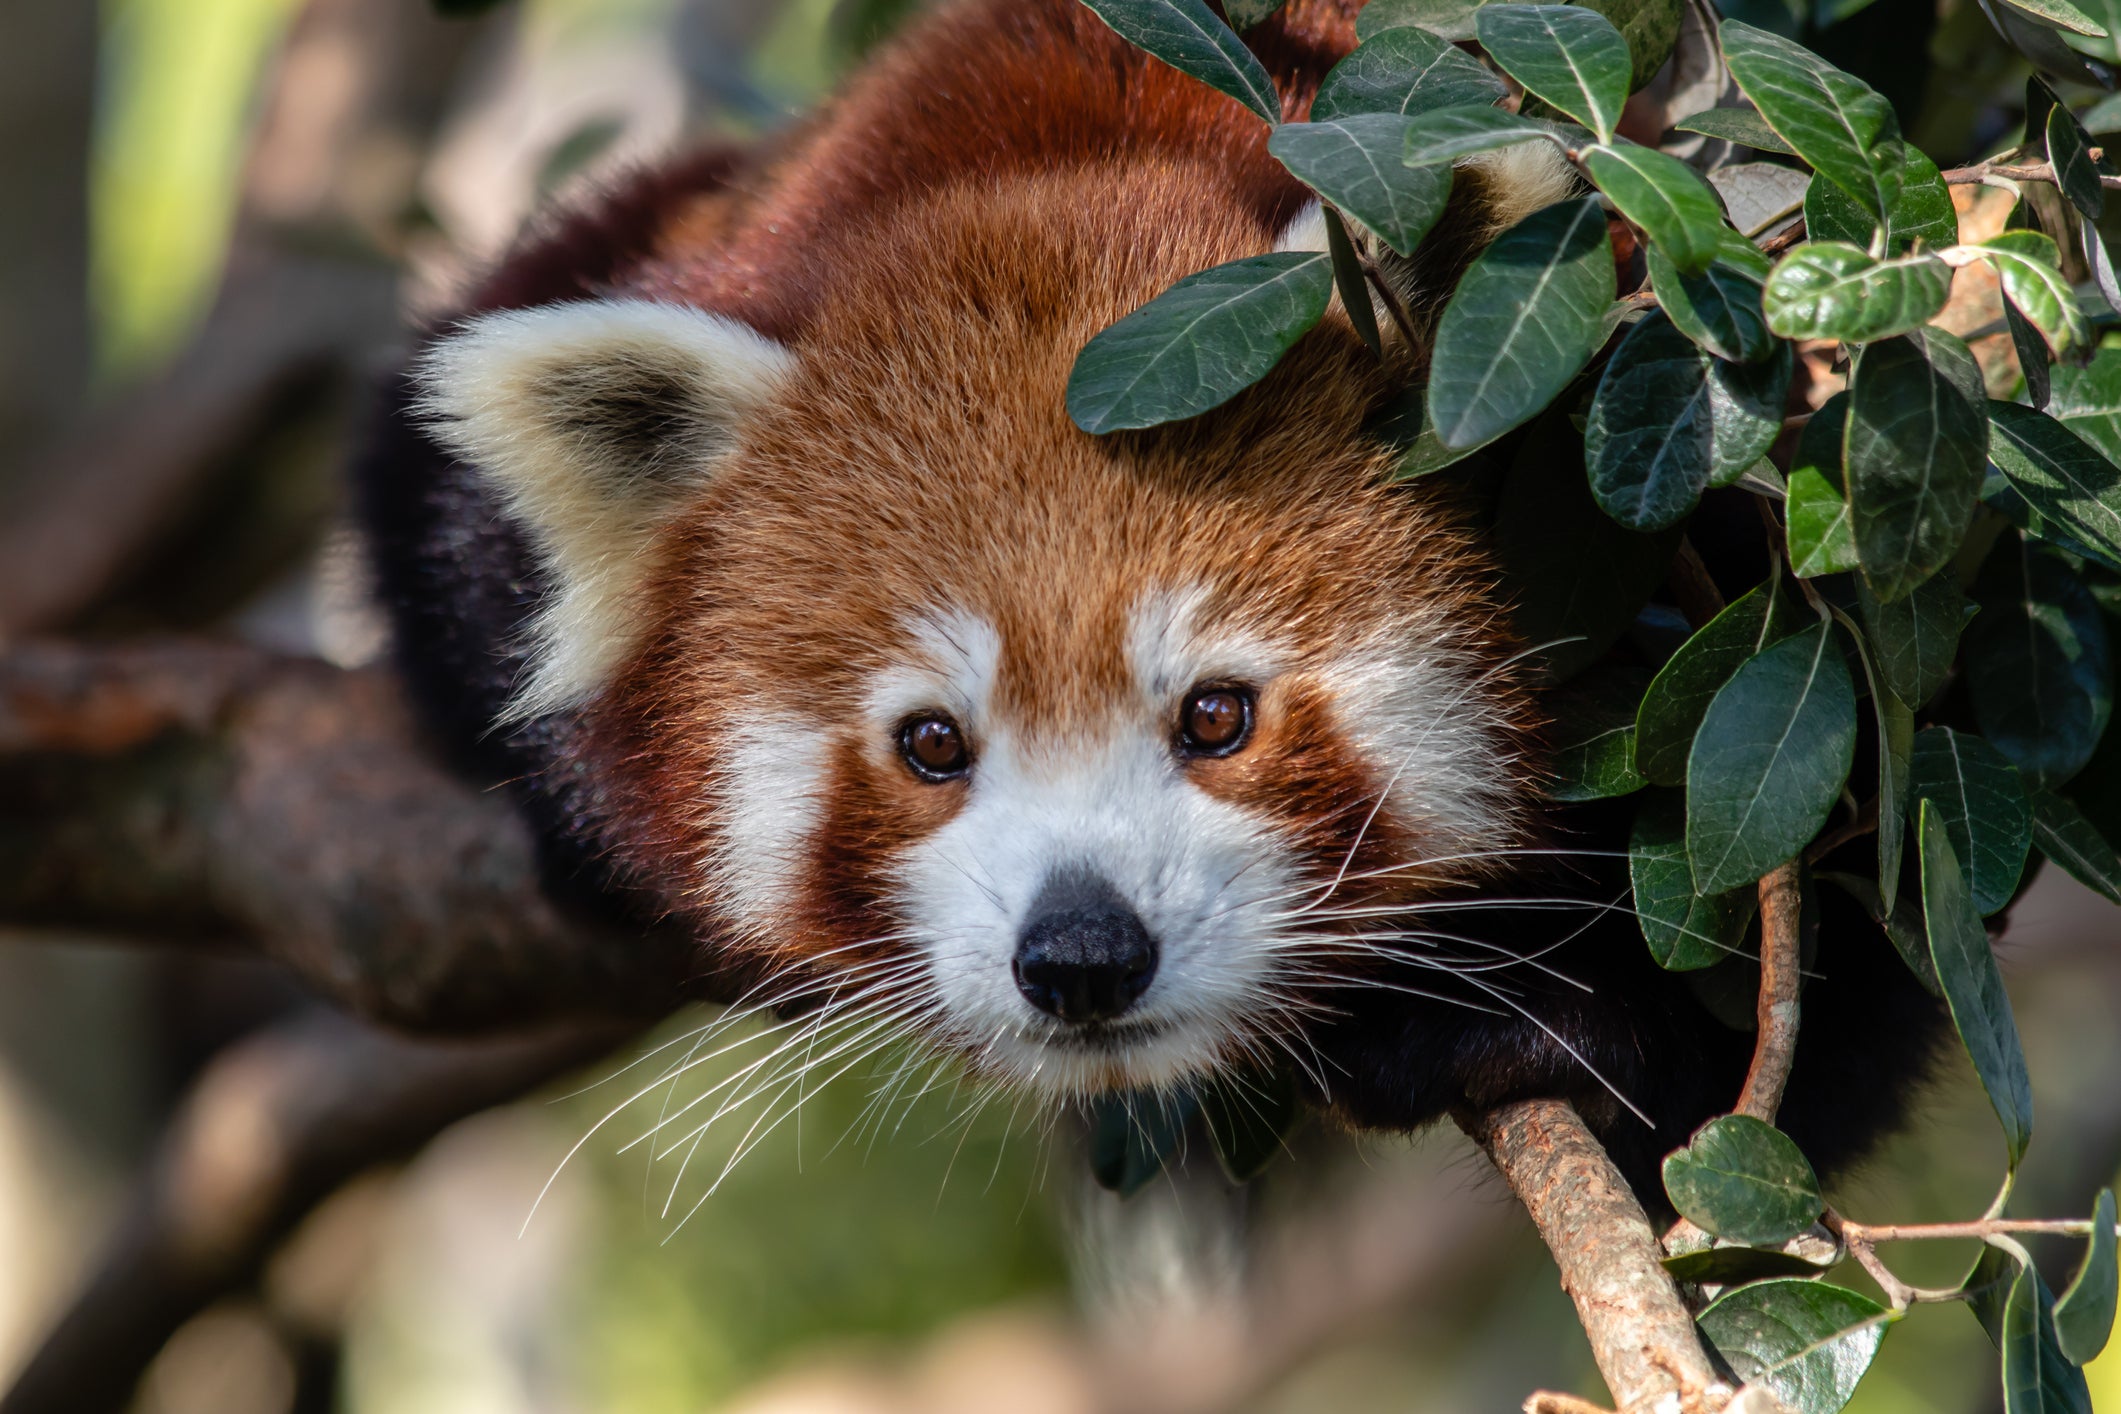 The endangered red panda is at risk due to habitat loss (iStock)